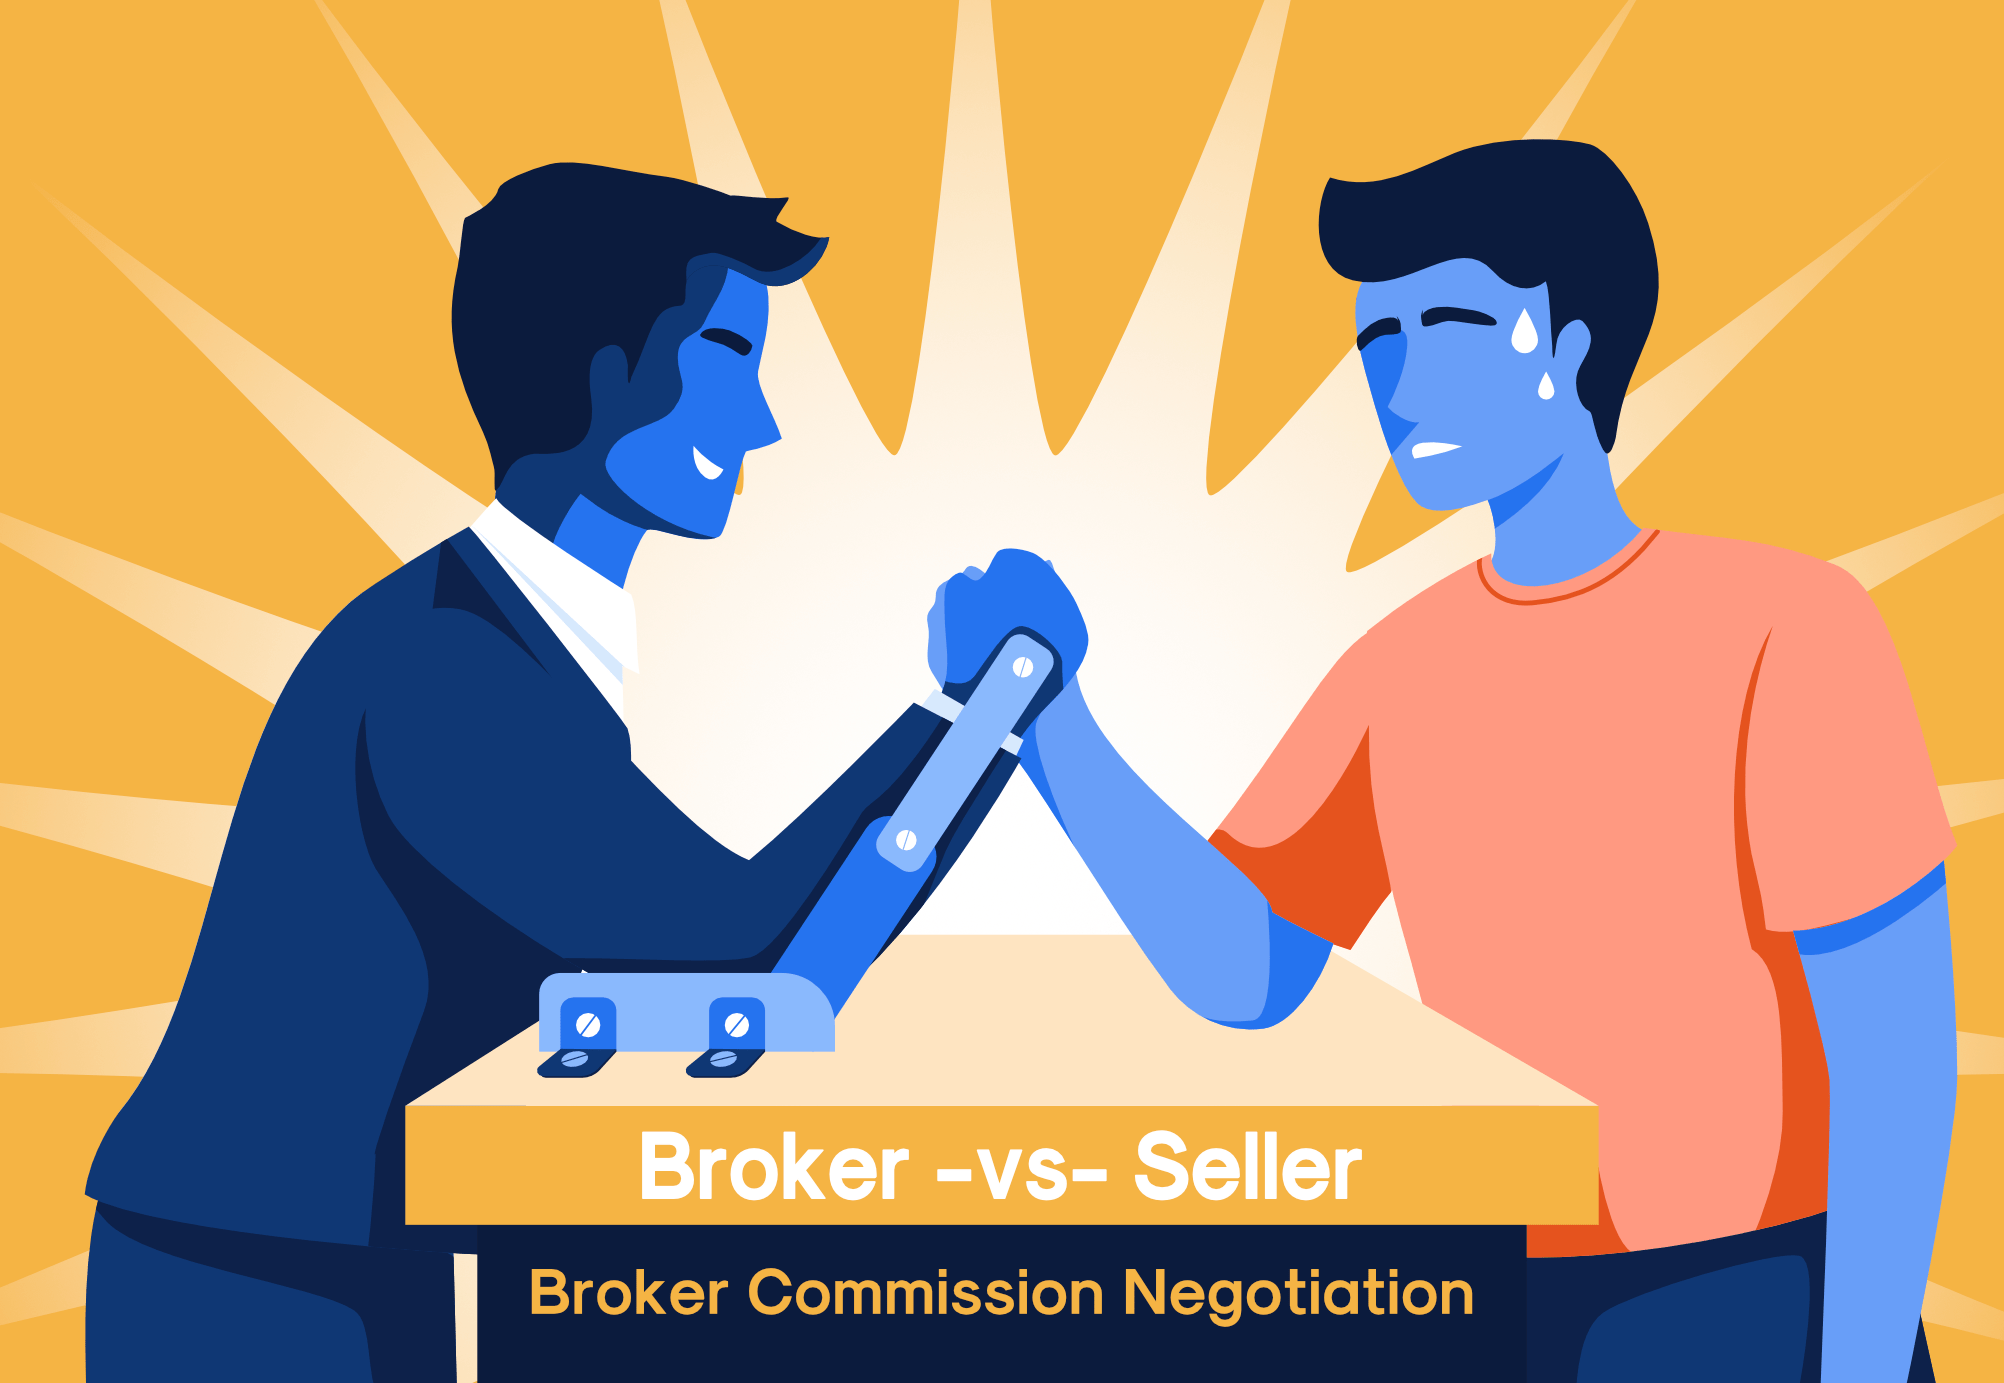 A seller and real estate broker are arm wrestling to negotiate the broker commission but the broker has a steel arm and can't lose